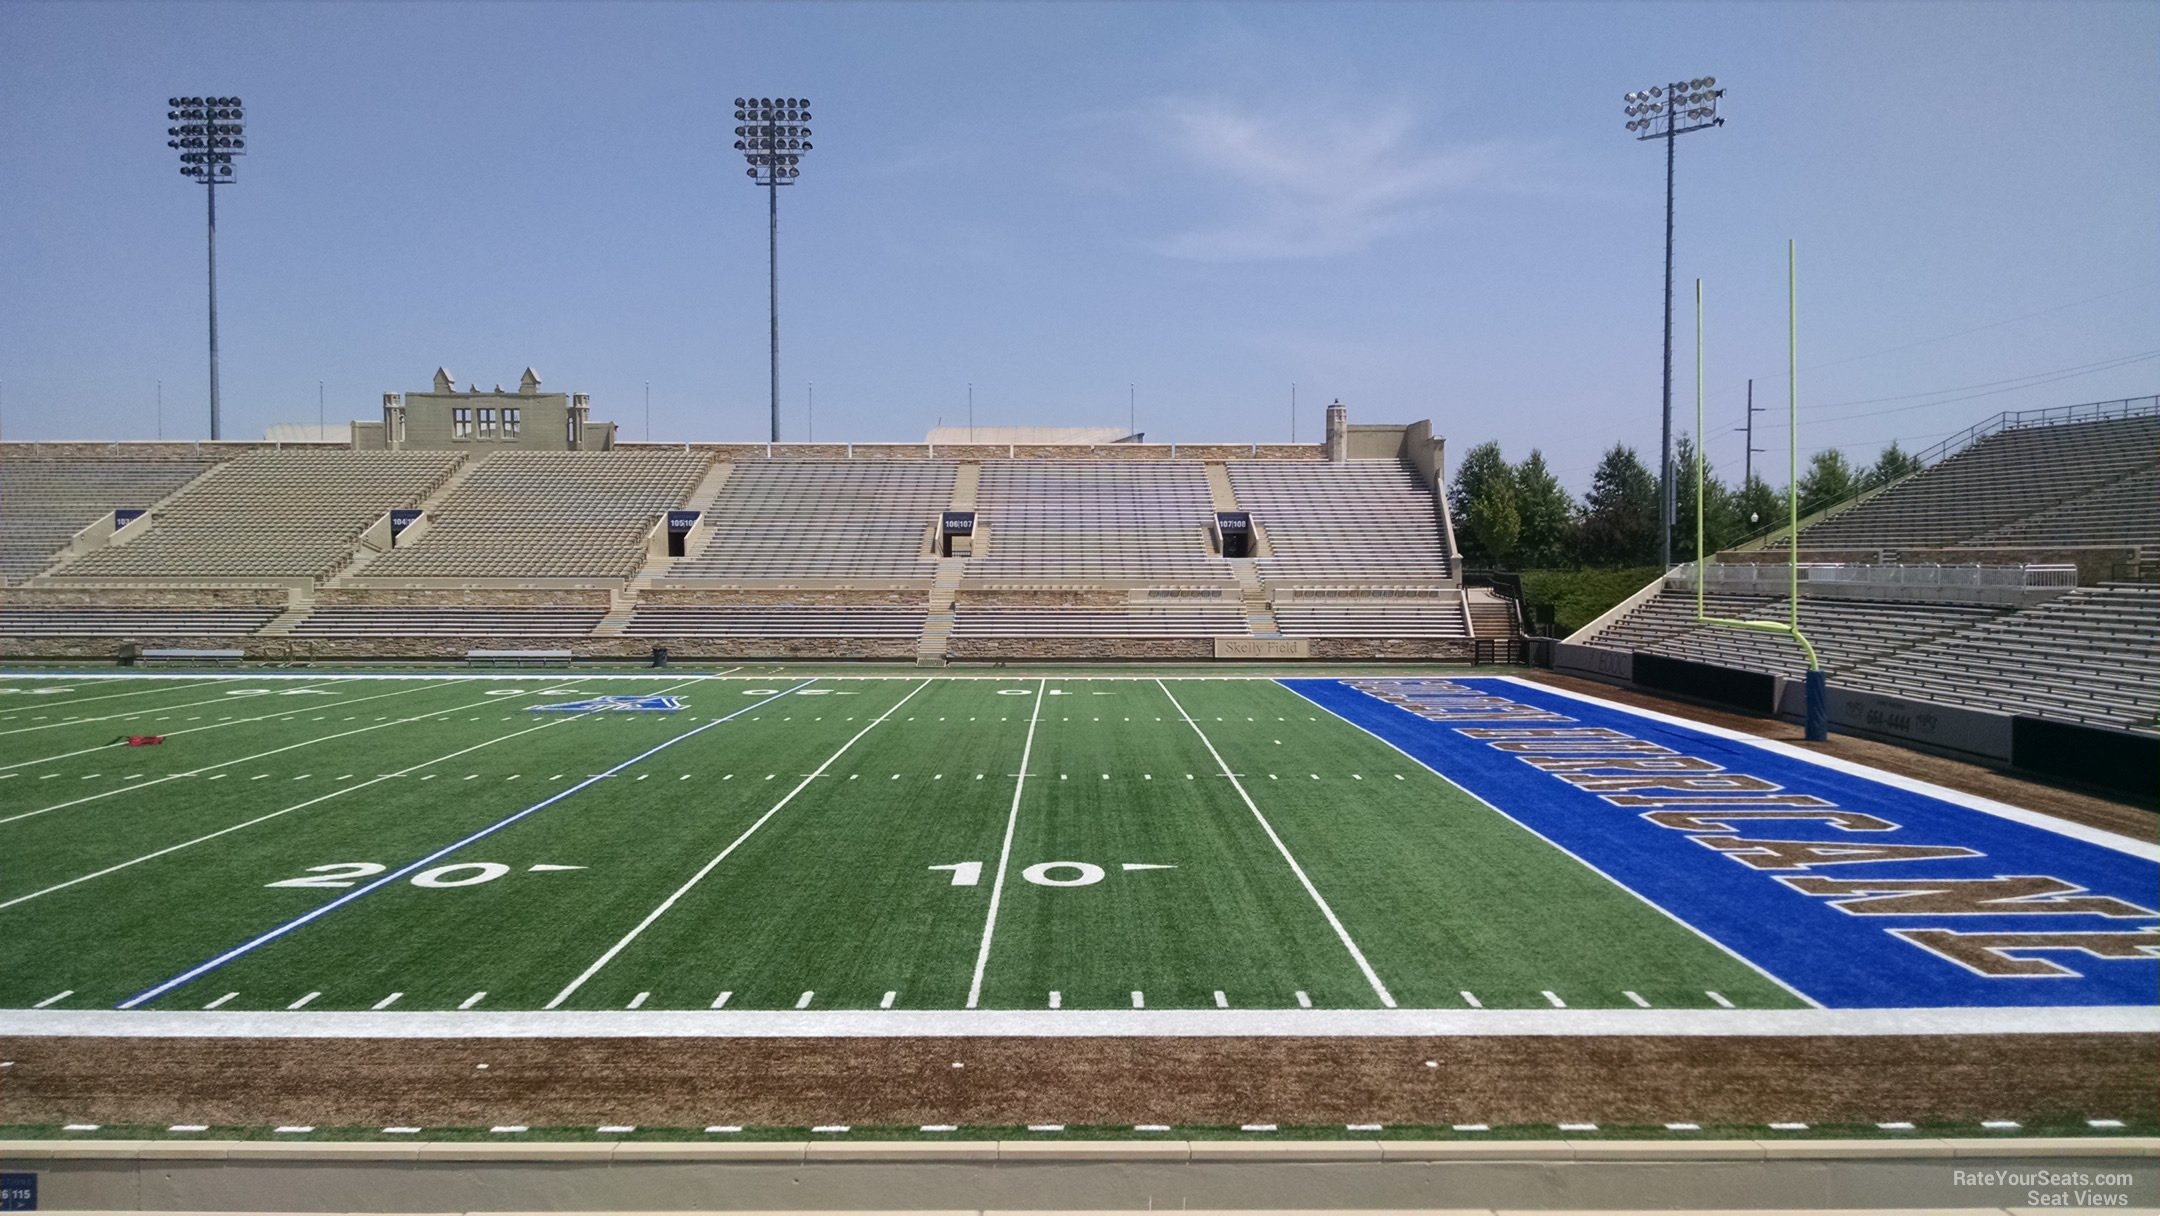 section 115, row 15 seat view  - h.a. chapman stadium